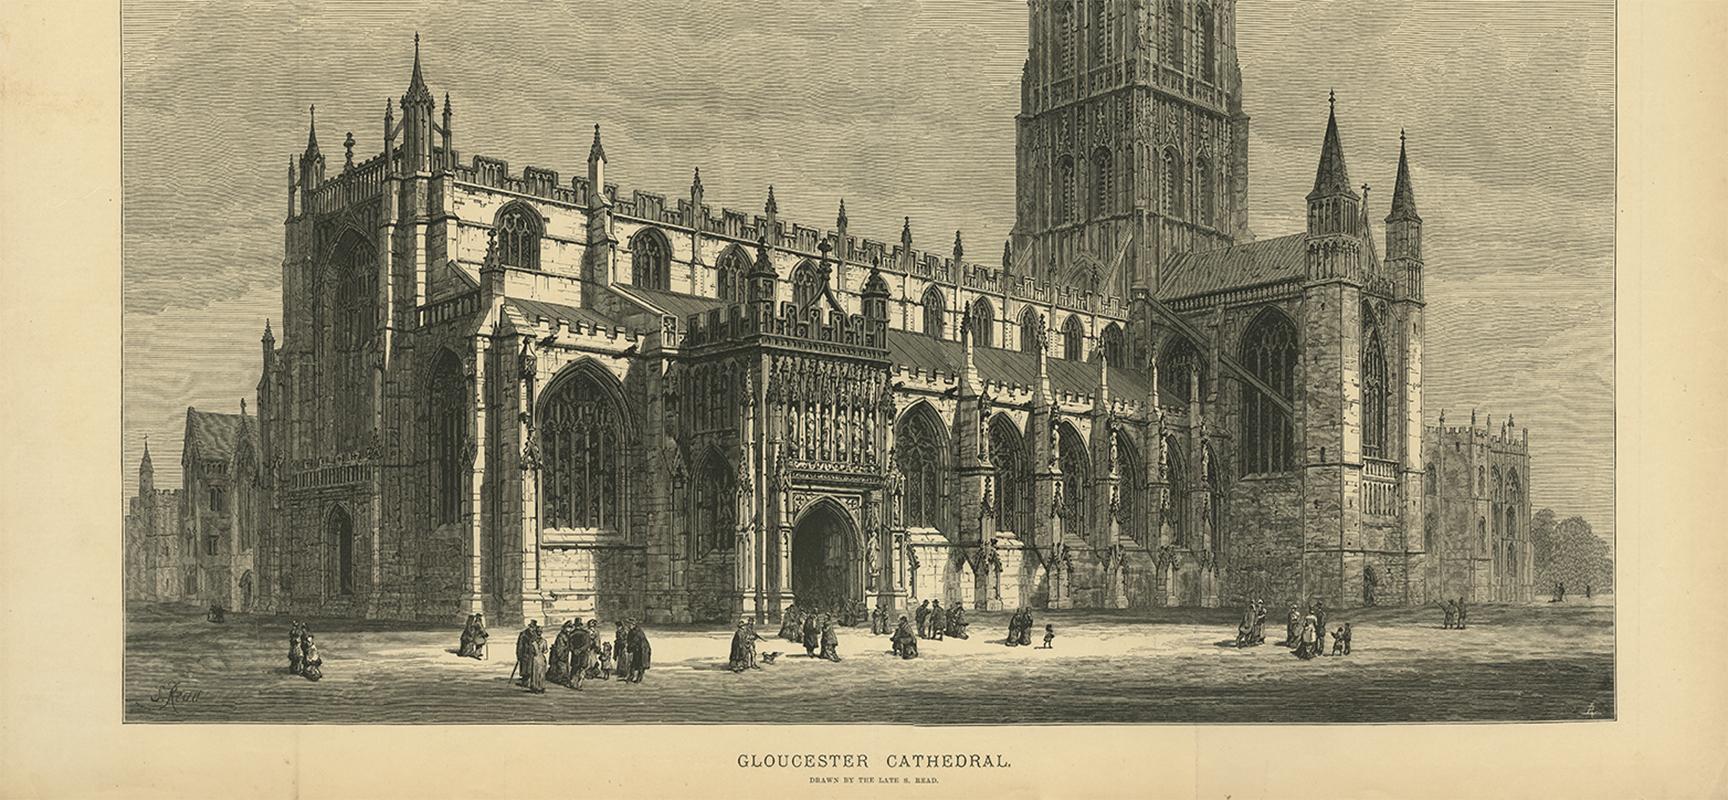 Paper Antique Print of Gloucester Cathedral from the Illustrated London News, 1883